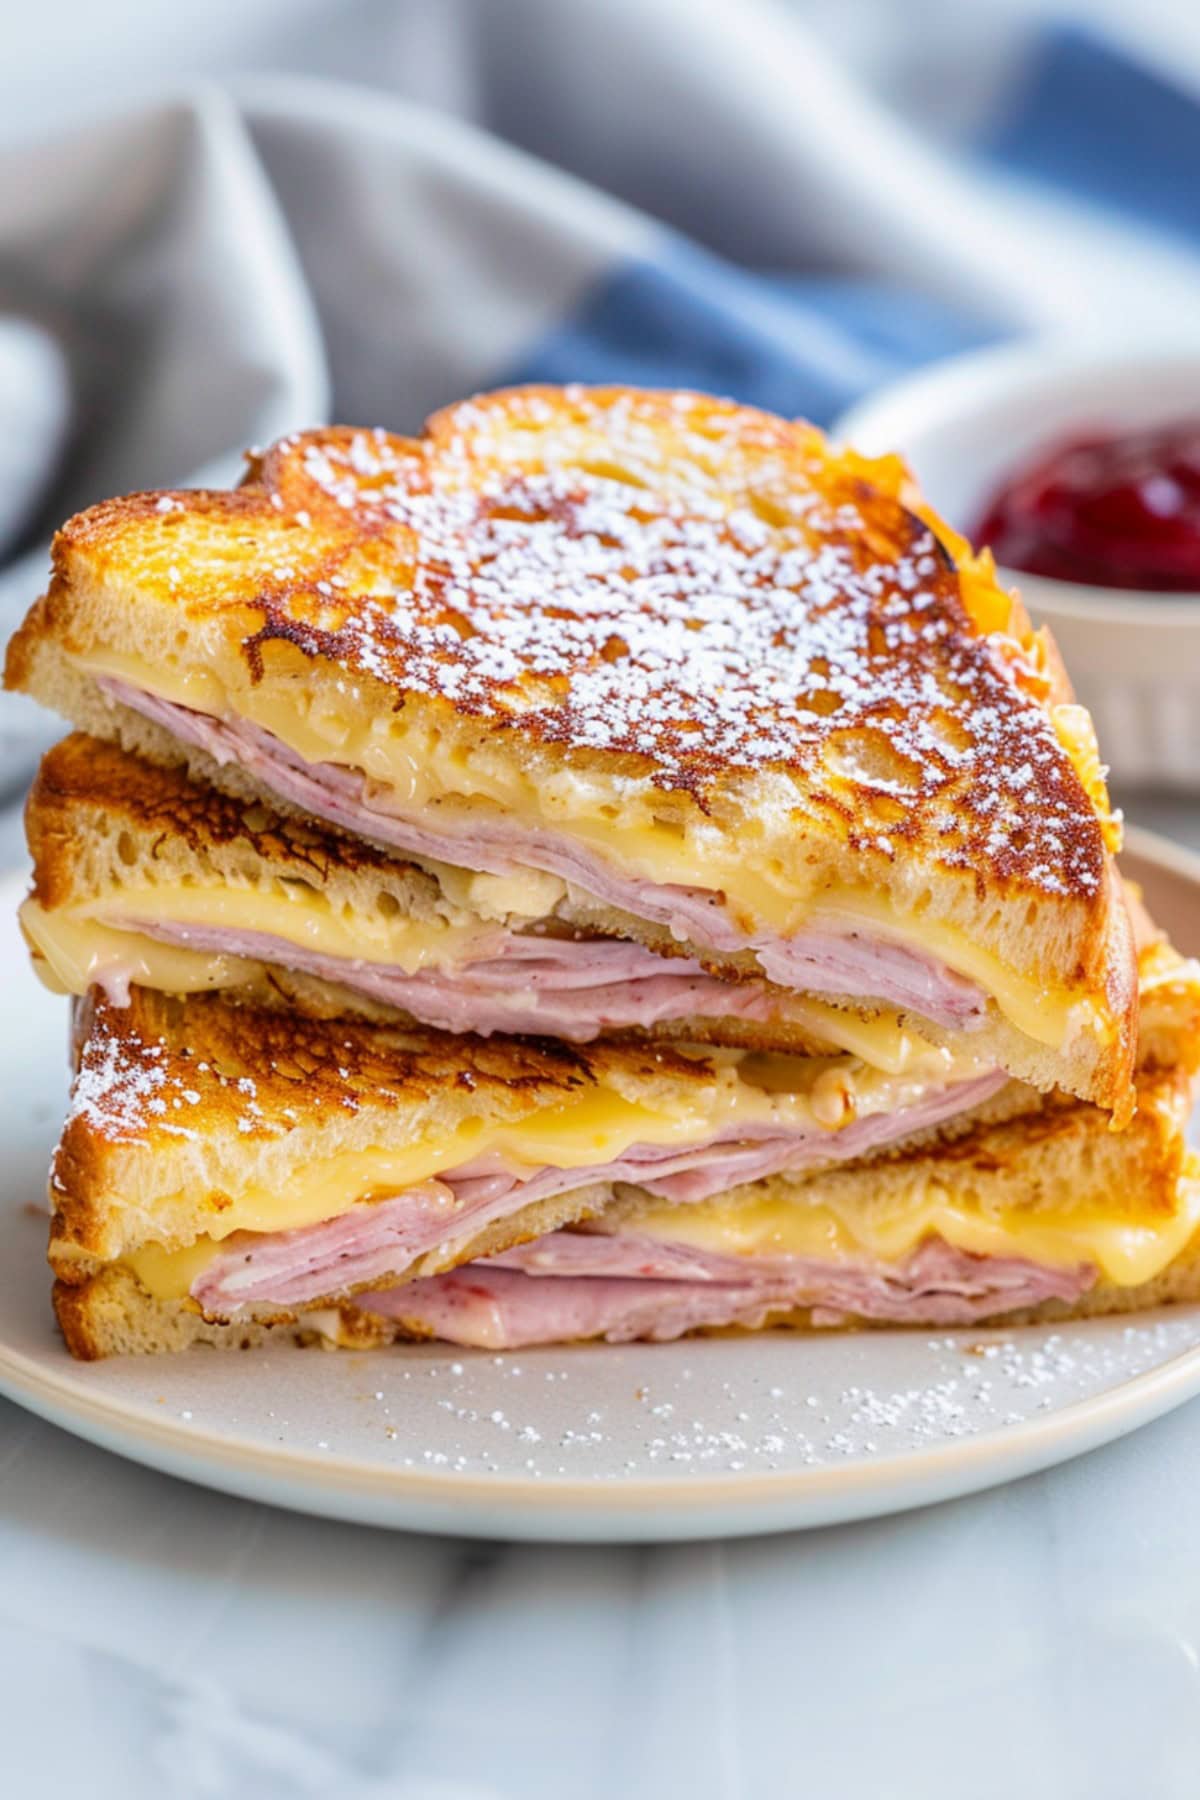 Irresistible Monte Cristo sandwich, featuring layers of savory meats and melted cheese between slices of golden-brown brioche French toast.